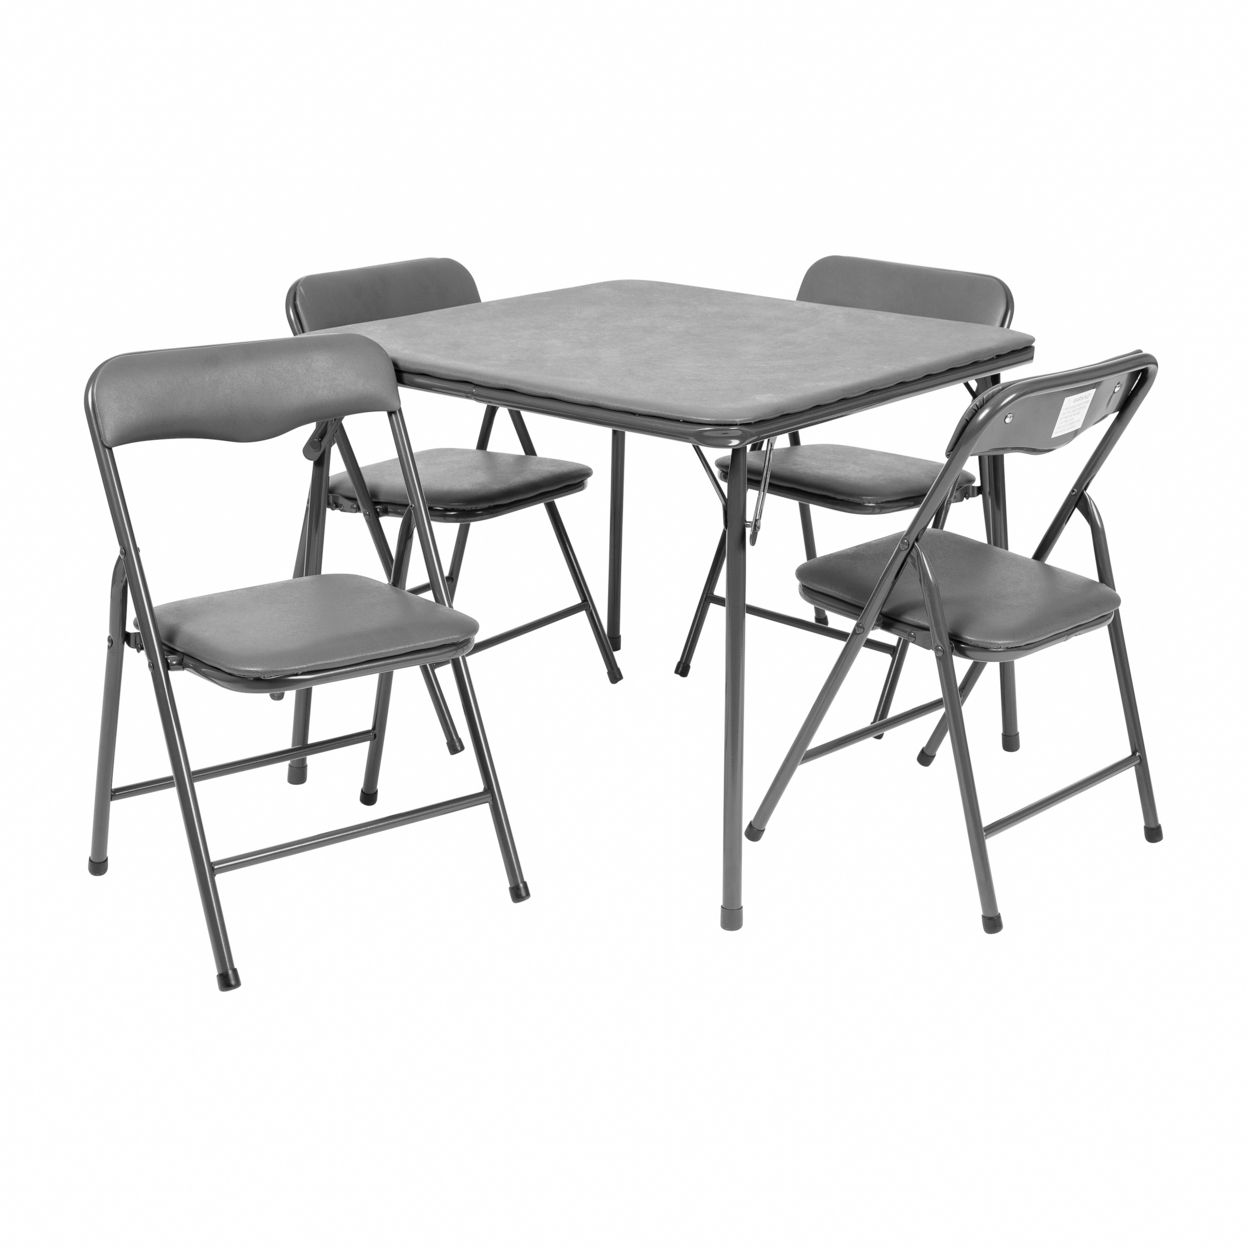 Kids Gray 5 Piece Folding Table And Chair Set